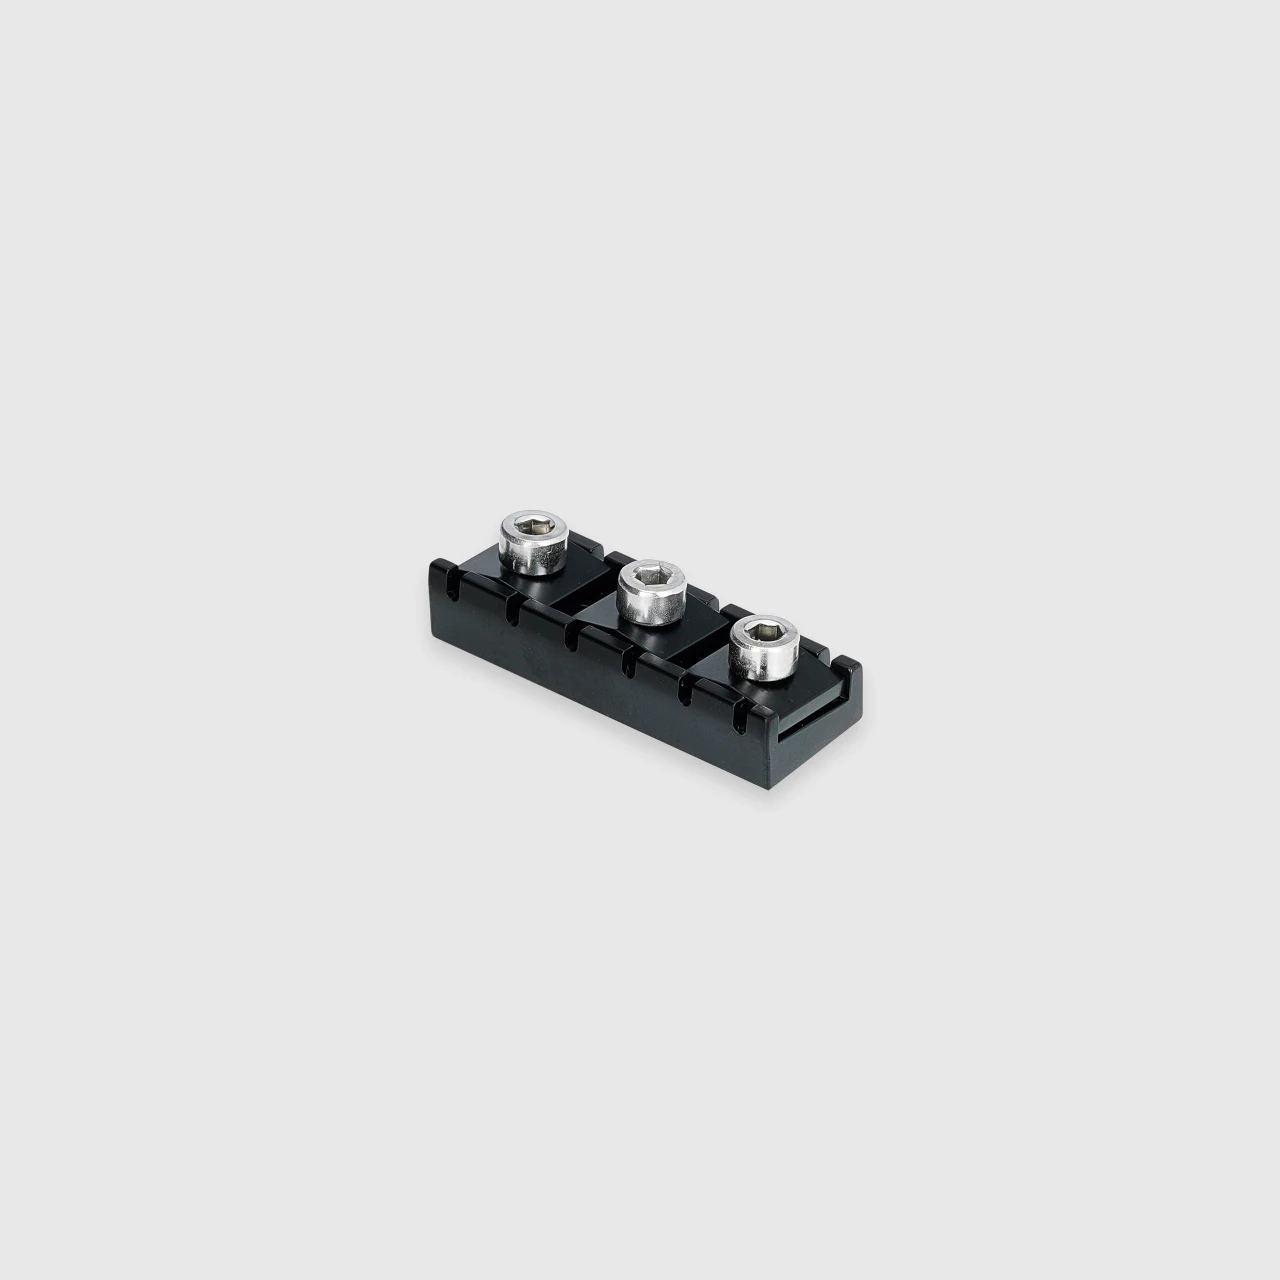 <img src=”Tremoline-Tremolo-system-flat-top-FT36T-R3-BS_7” width="1280" height="1280" alt=”locking nut of the Tremoline FT36T tremolo from the front side” />